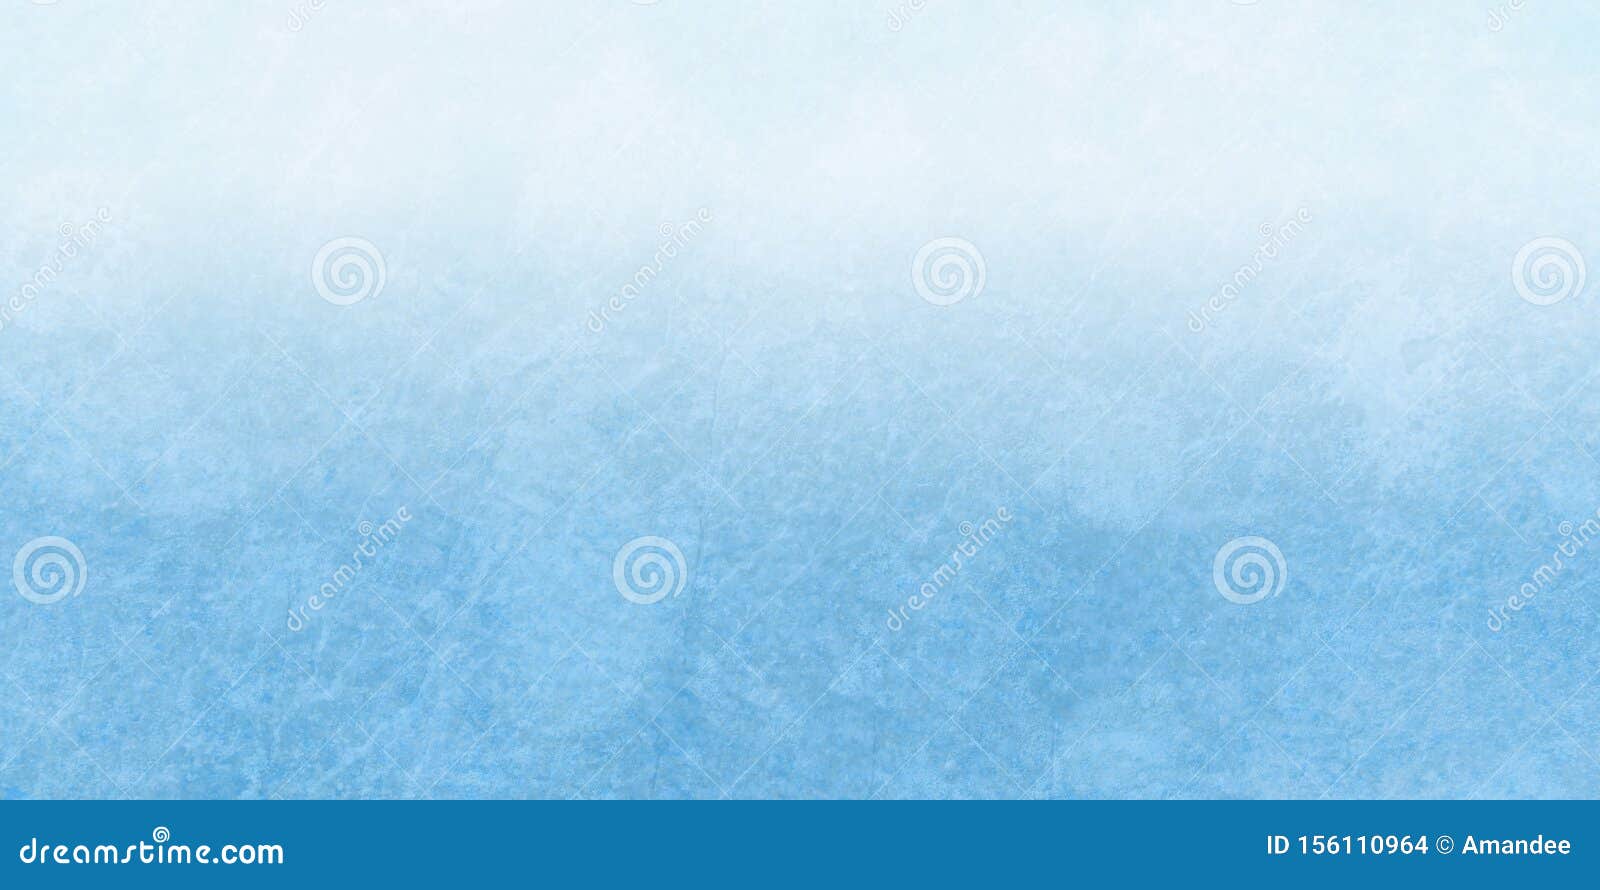 blue background with texture and gradient white hazy top border , elegant blue and white soft color